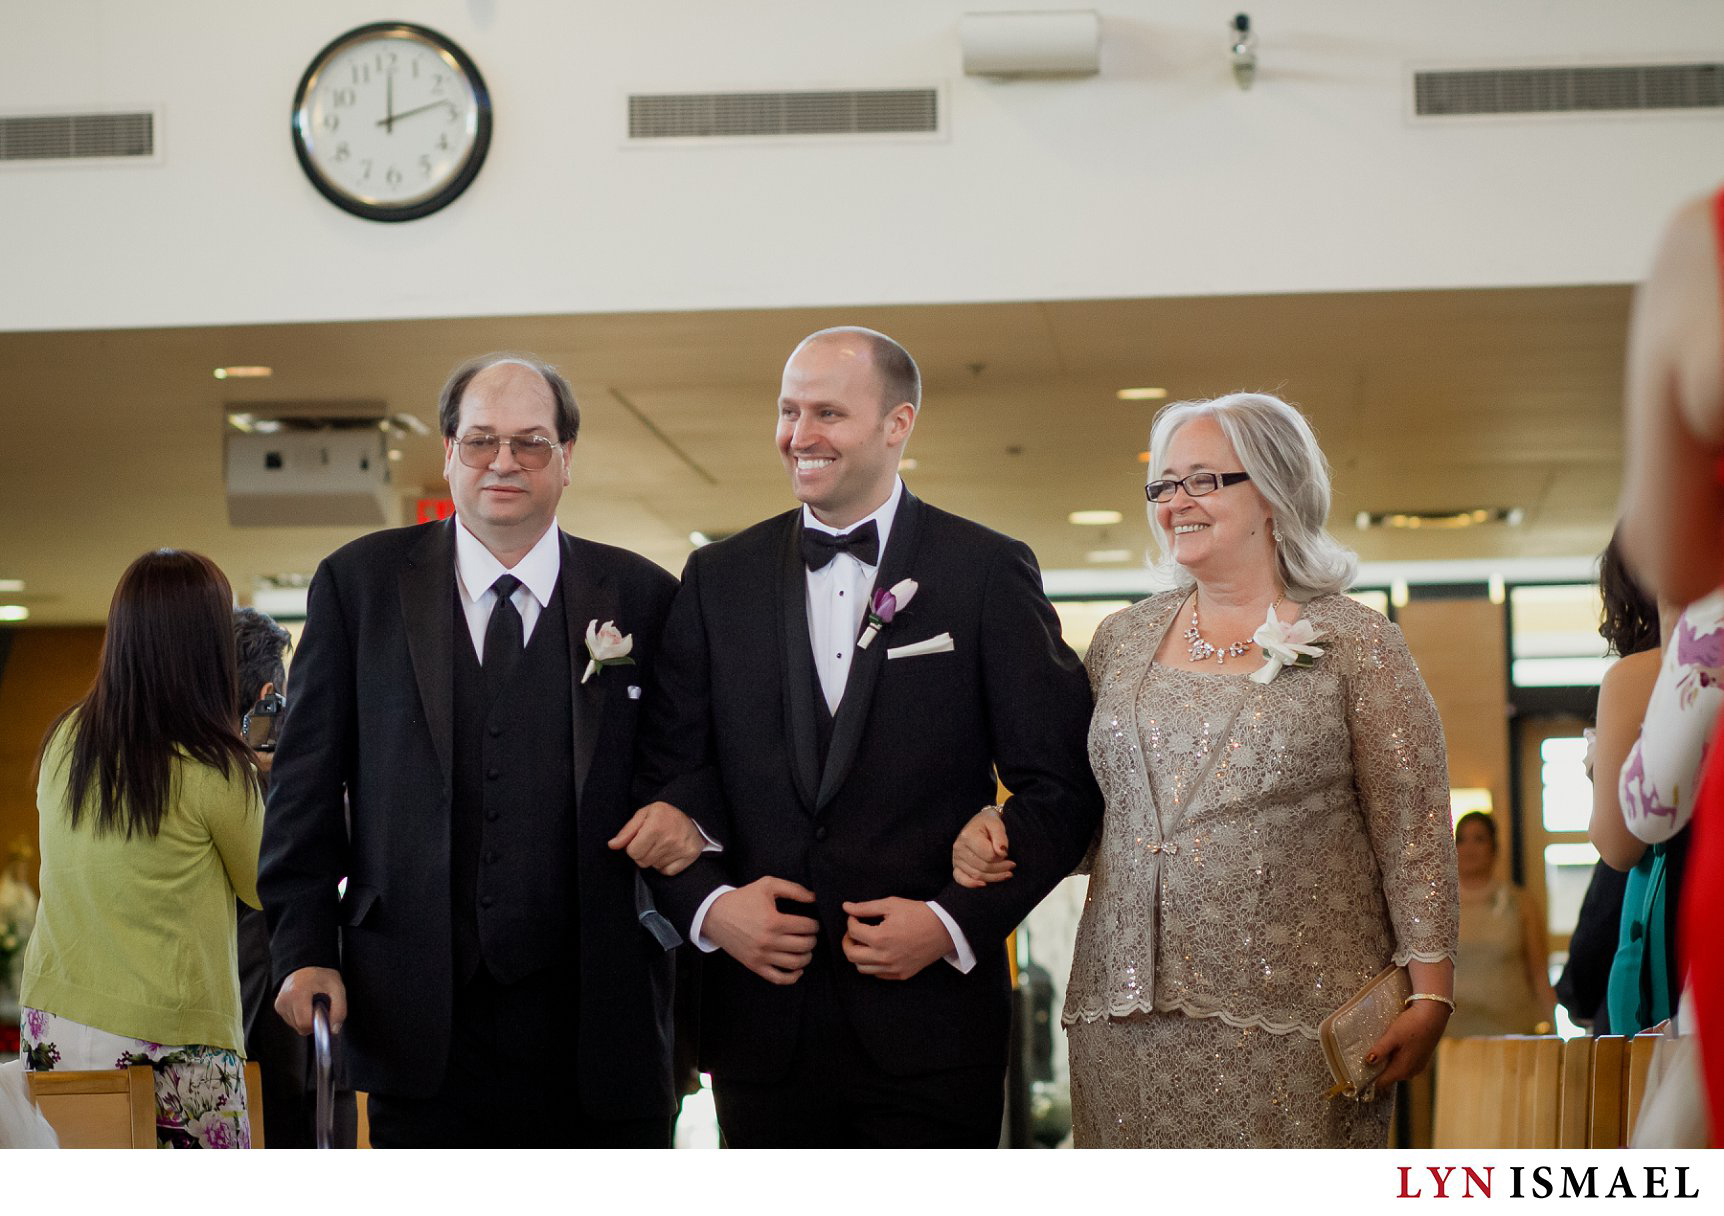 Father of the bride walks down the aisle with his parents